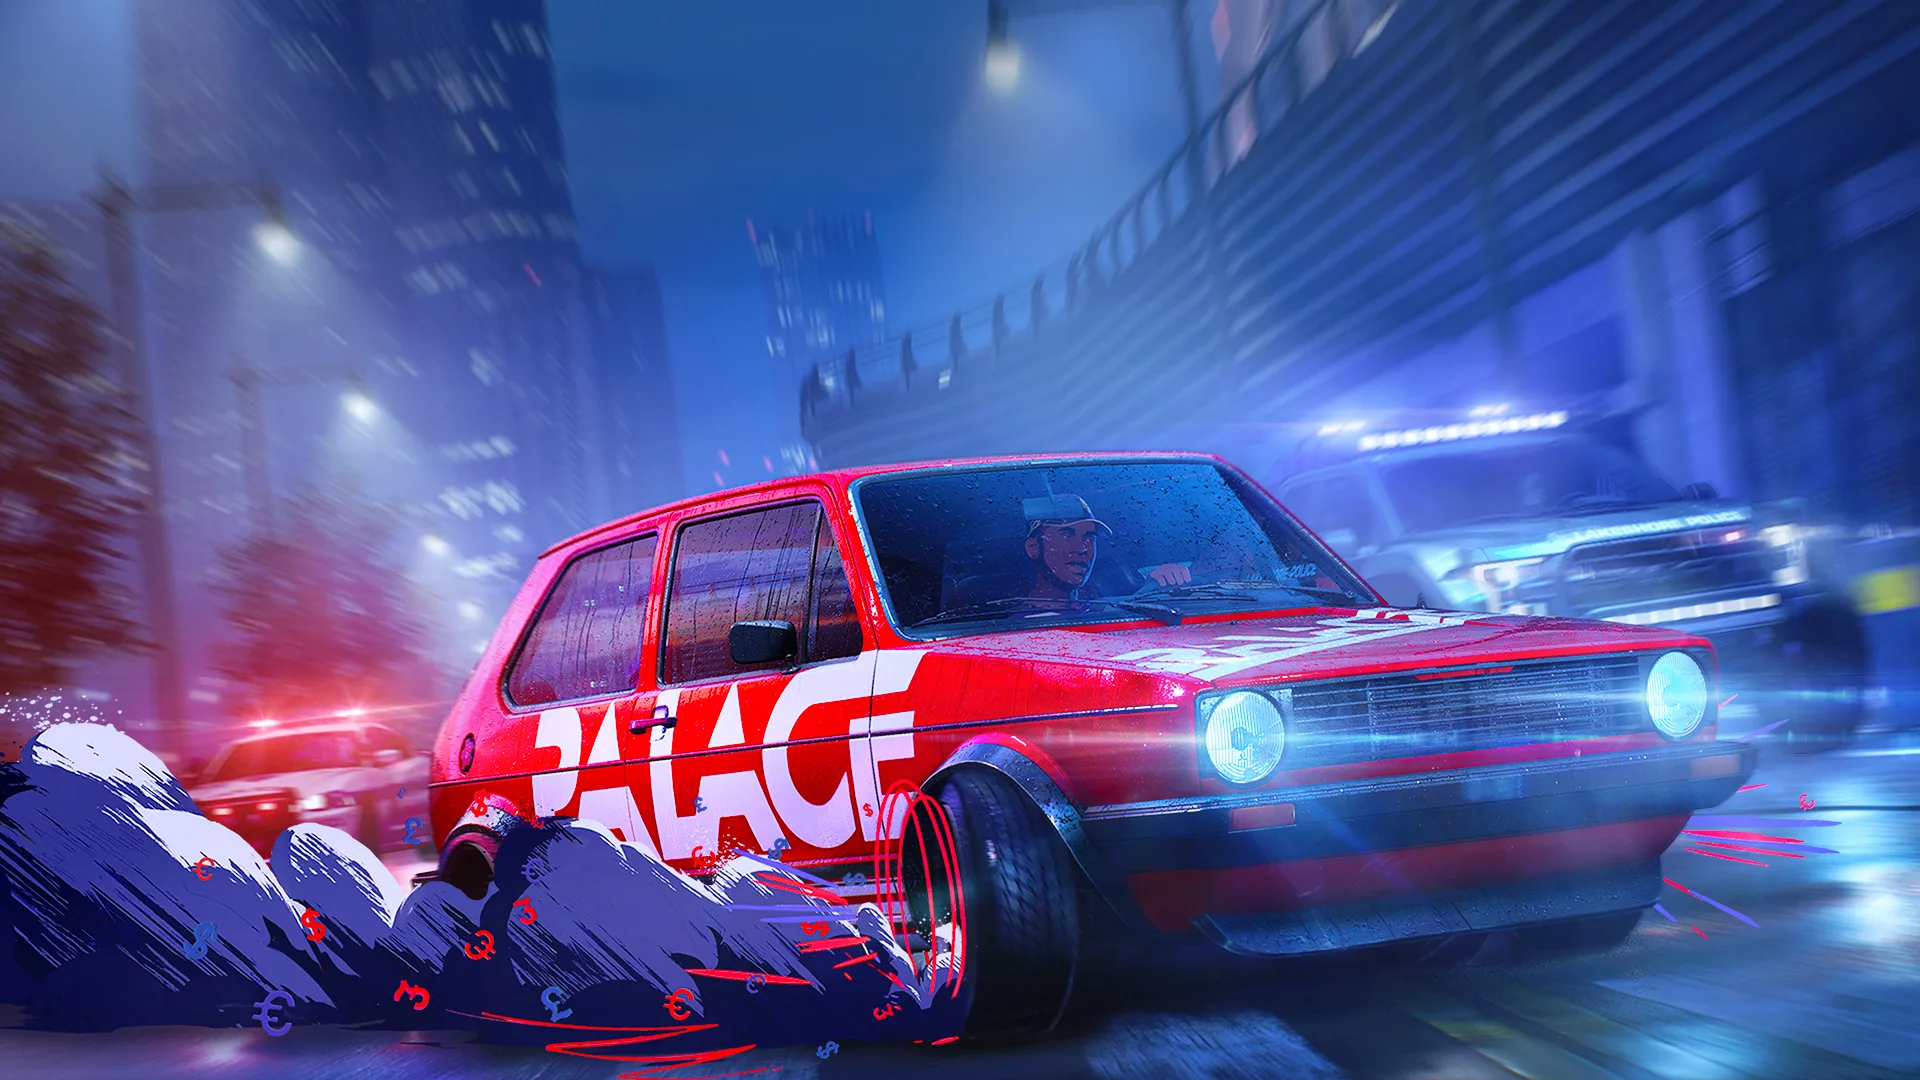 artwork from need for speed unbound showing the graffiti effects